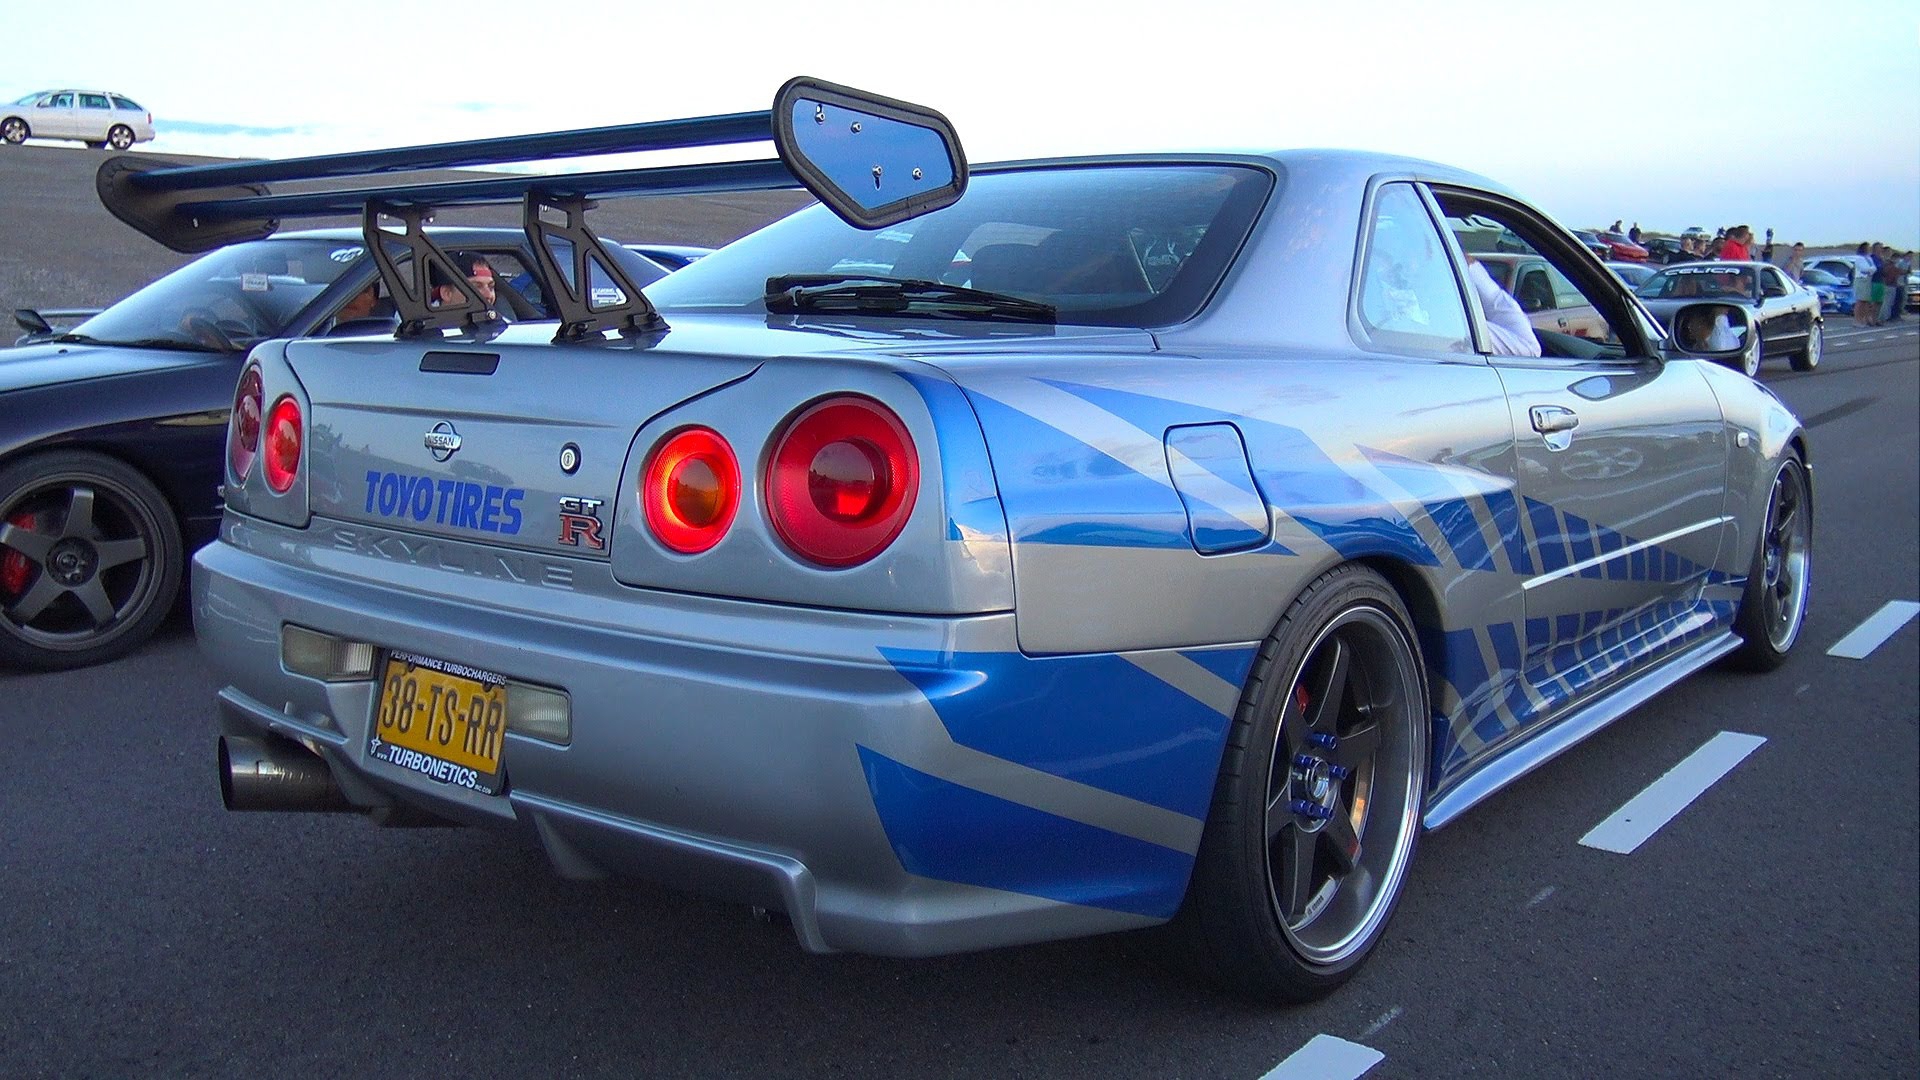 Nissan Skyline GT-R Wallpapers Images Photos Pictures Backgrounds